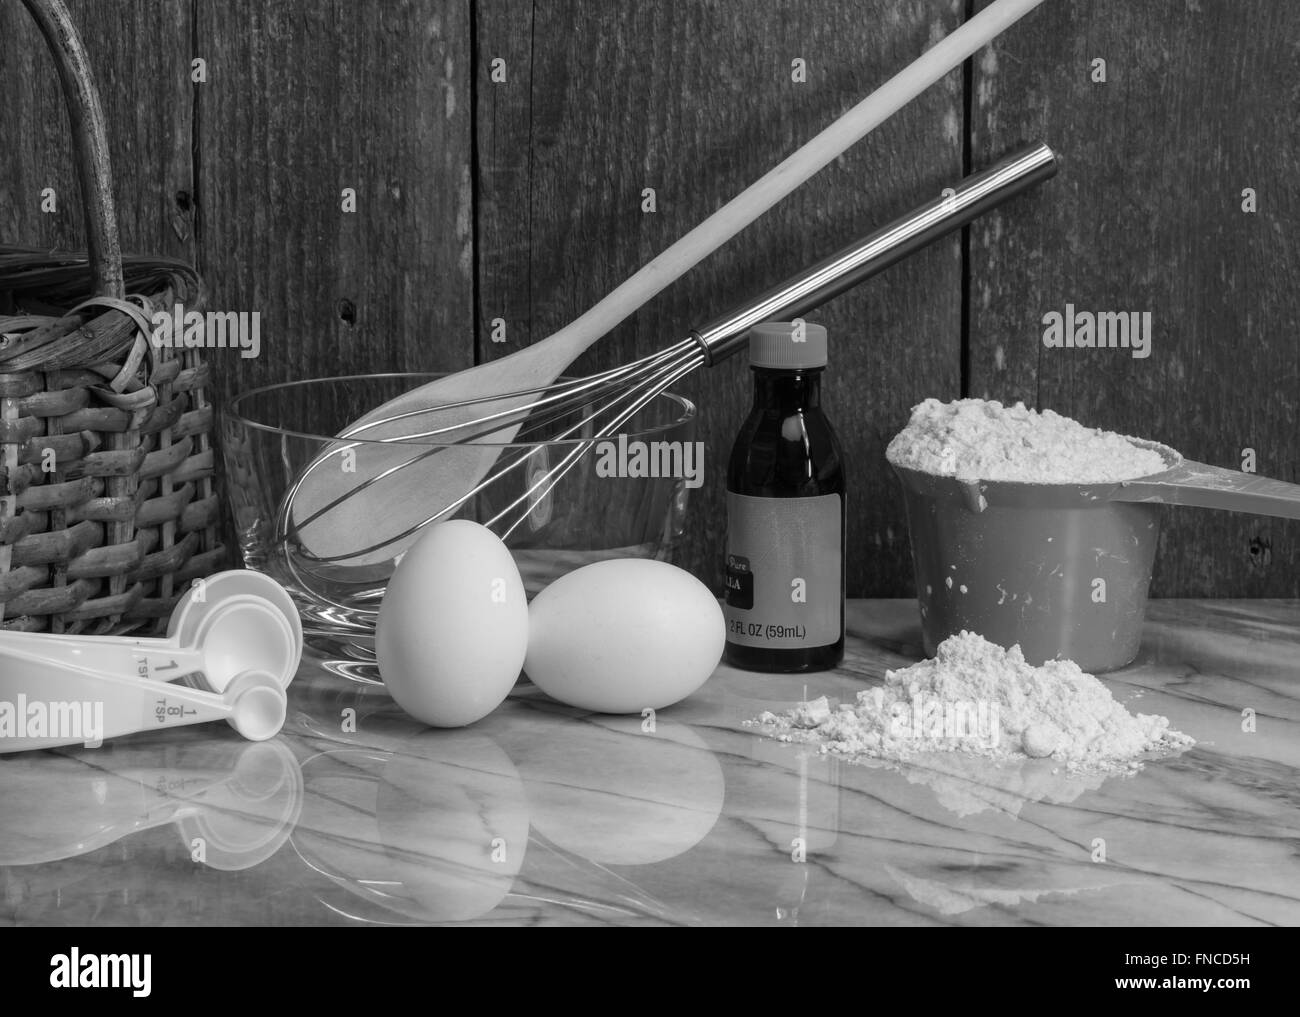 eggs for home cooking and baking Stock Photo